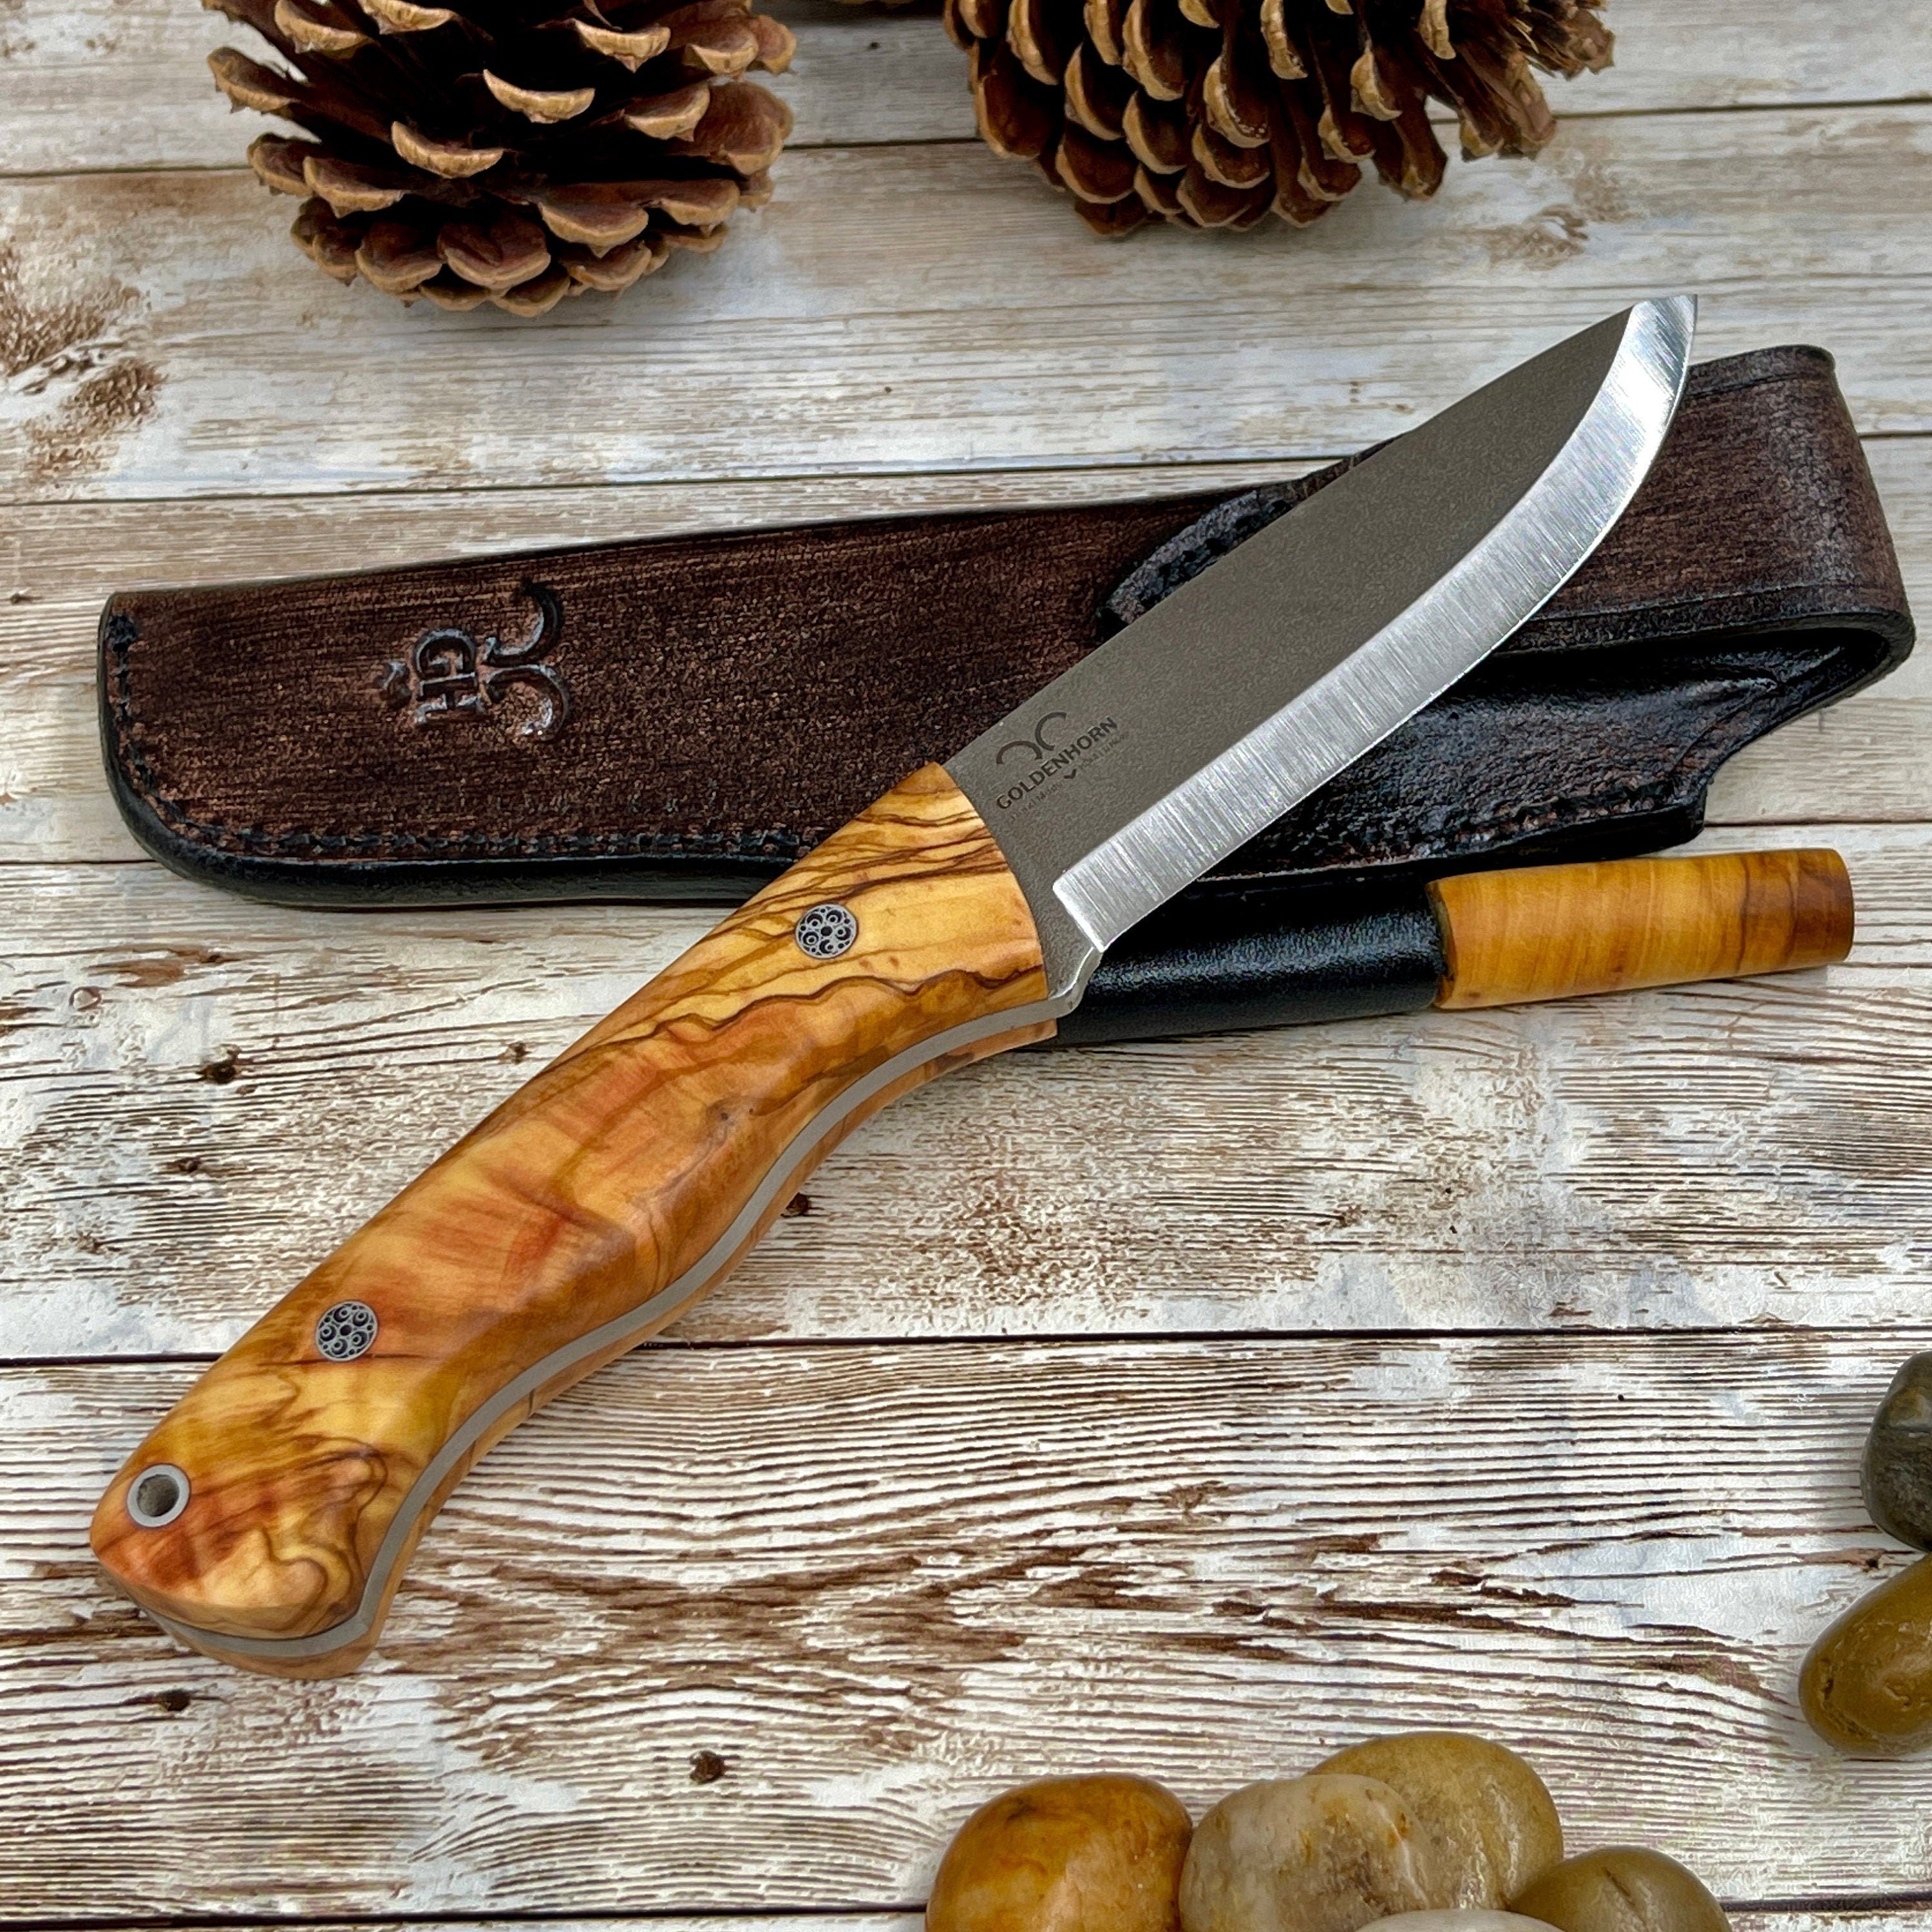 Camping Knife With Olive Wood Handle, 1/4 Inch N 690 Steel and